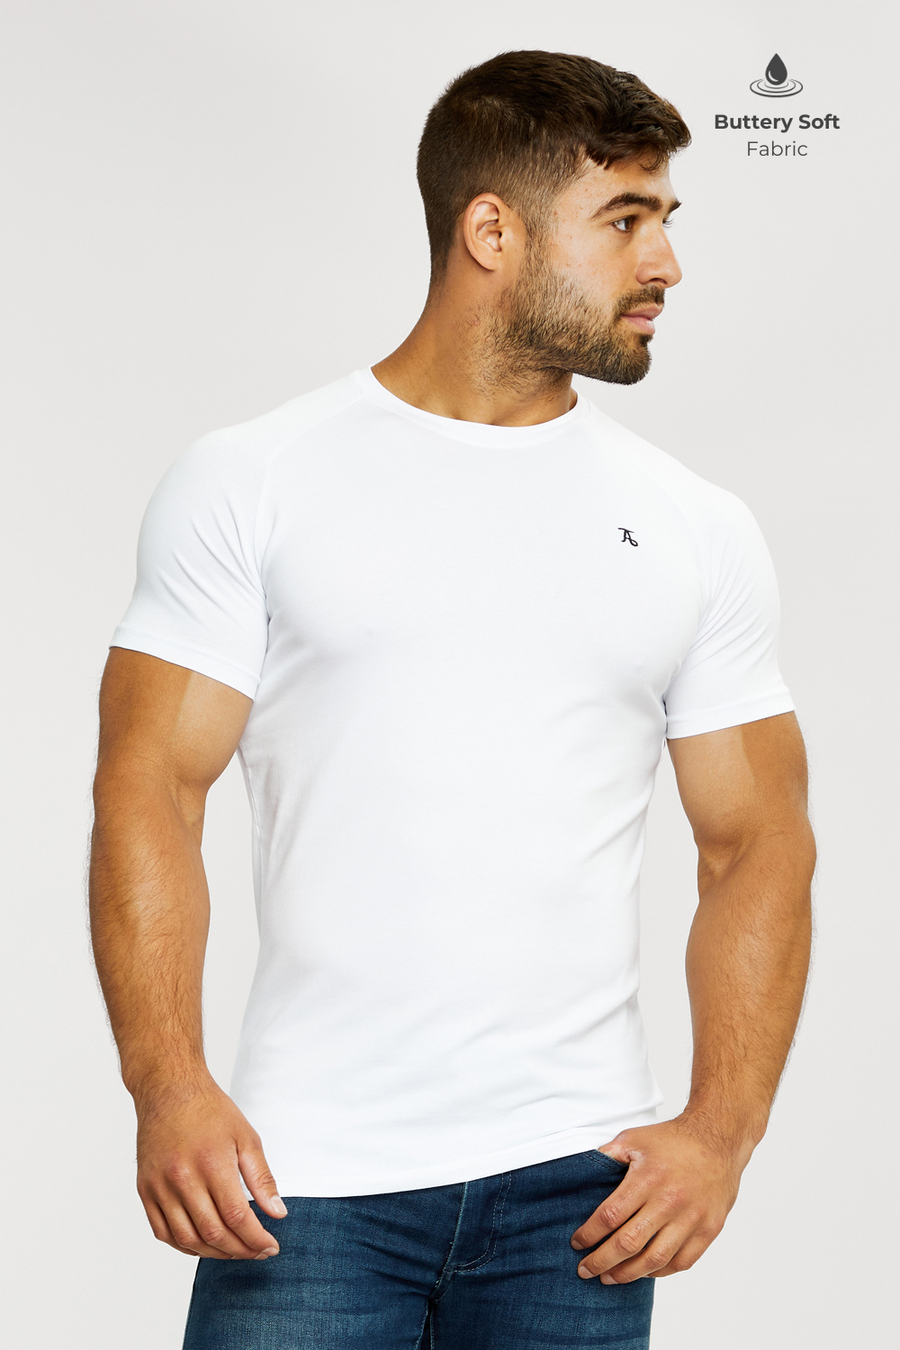 Premium Athletic Fit T-Shirt in White - TAILORED ATHLETE - USA